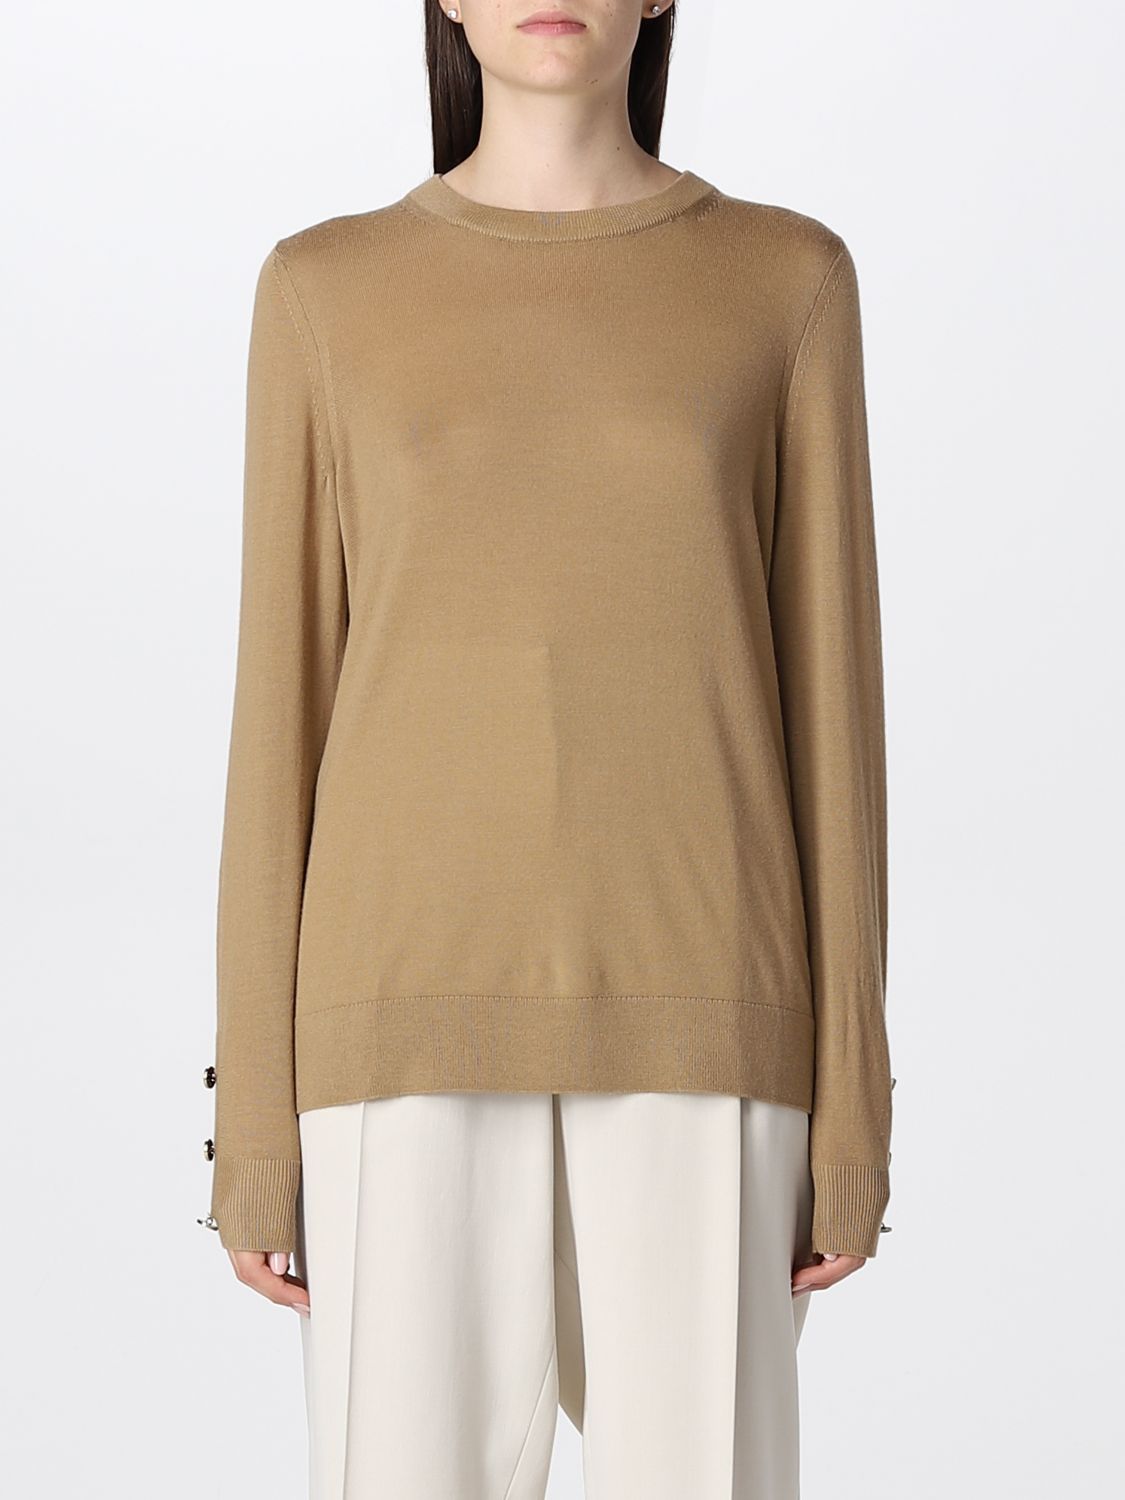 Michael Kors Outlet: sweater for woman - Camel | Michael Kors sweater  MU260EF4VR online on 